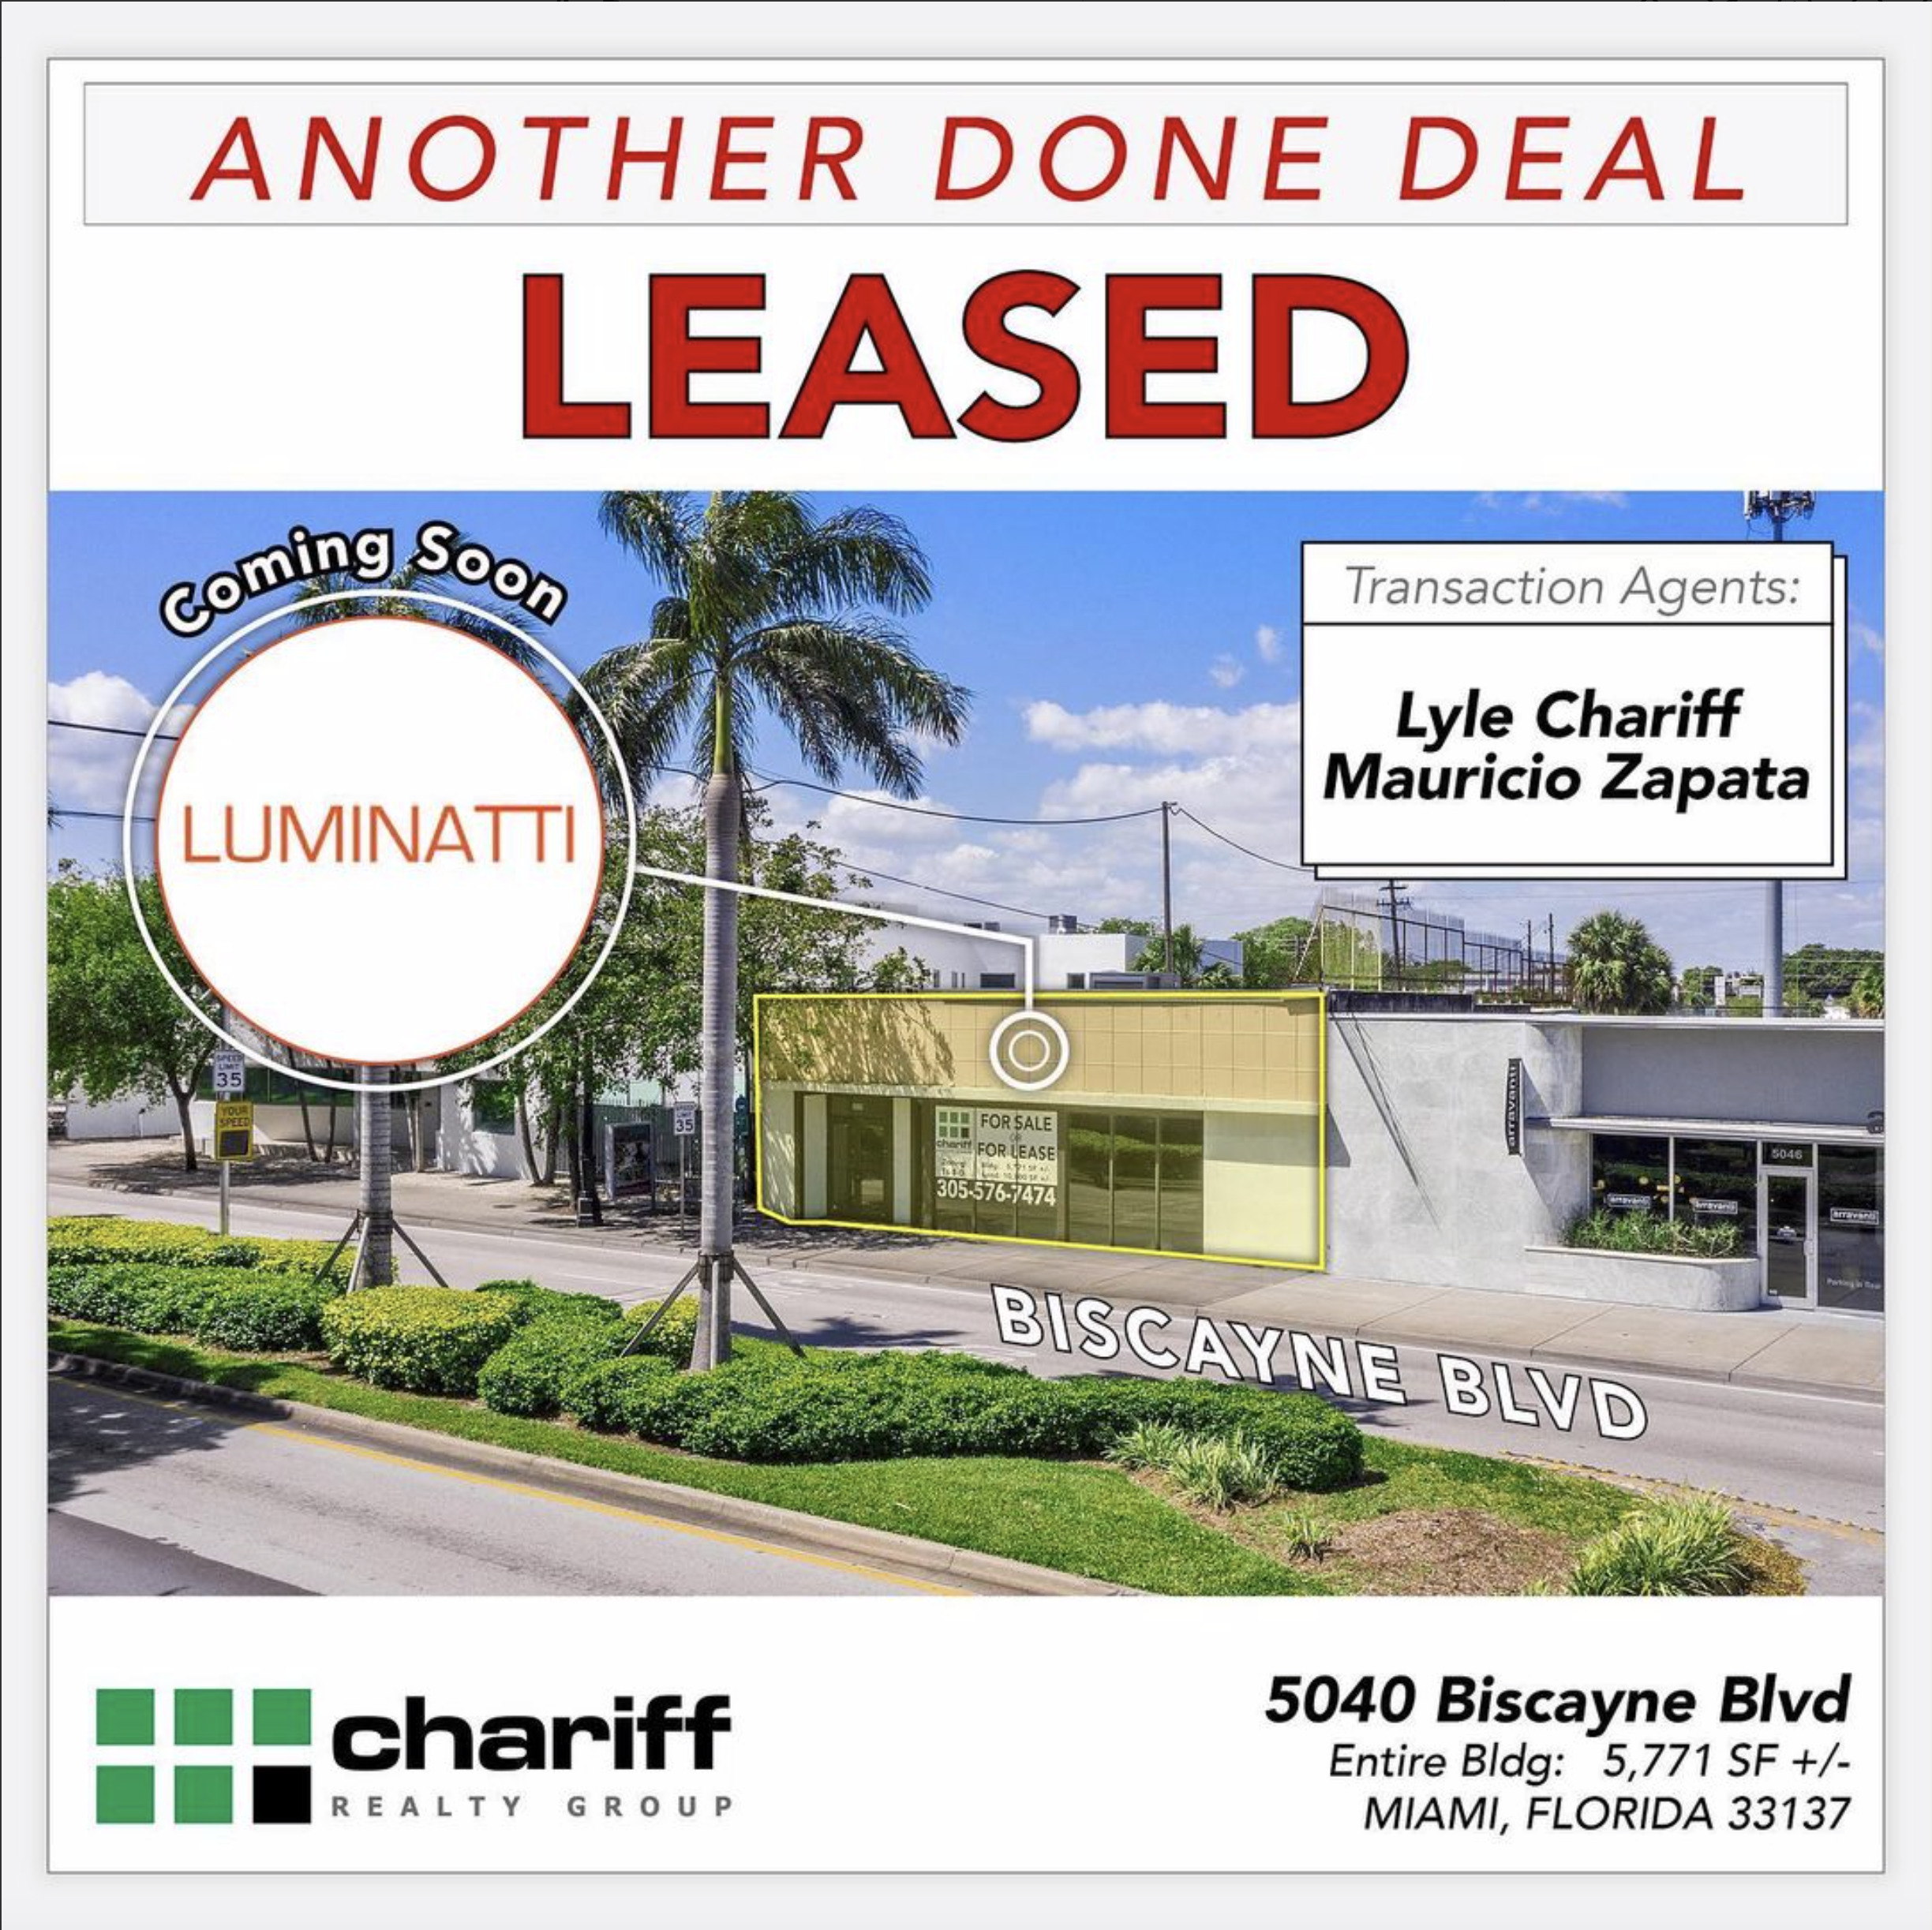 5040 Biscayne Blvd - Another Done Deal Leased - Chariff Realty Group